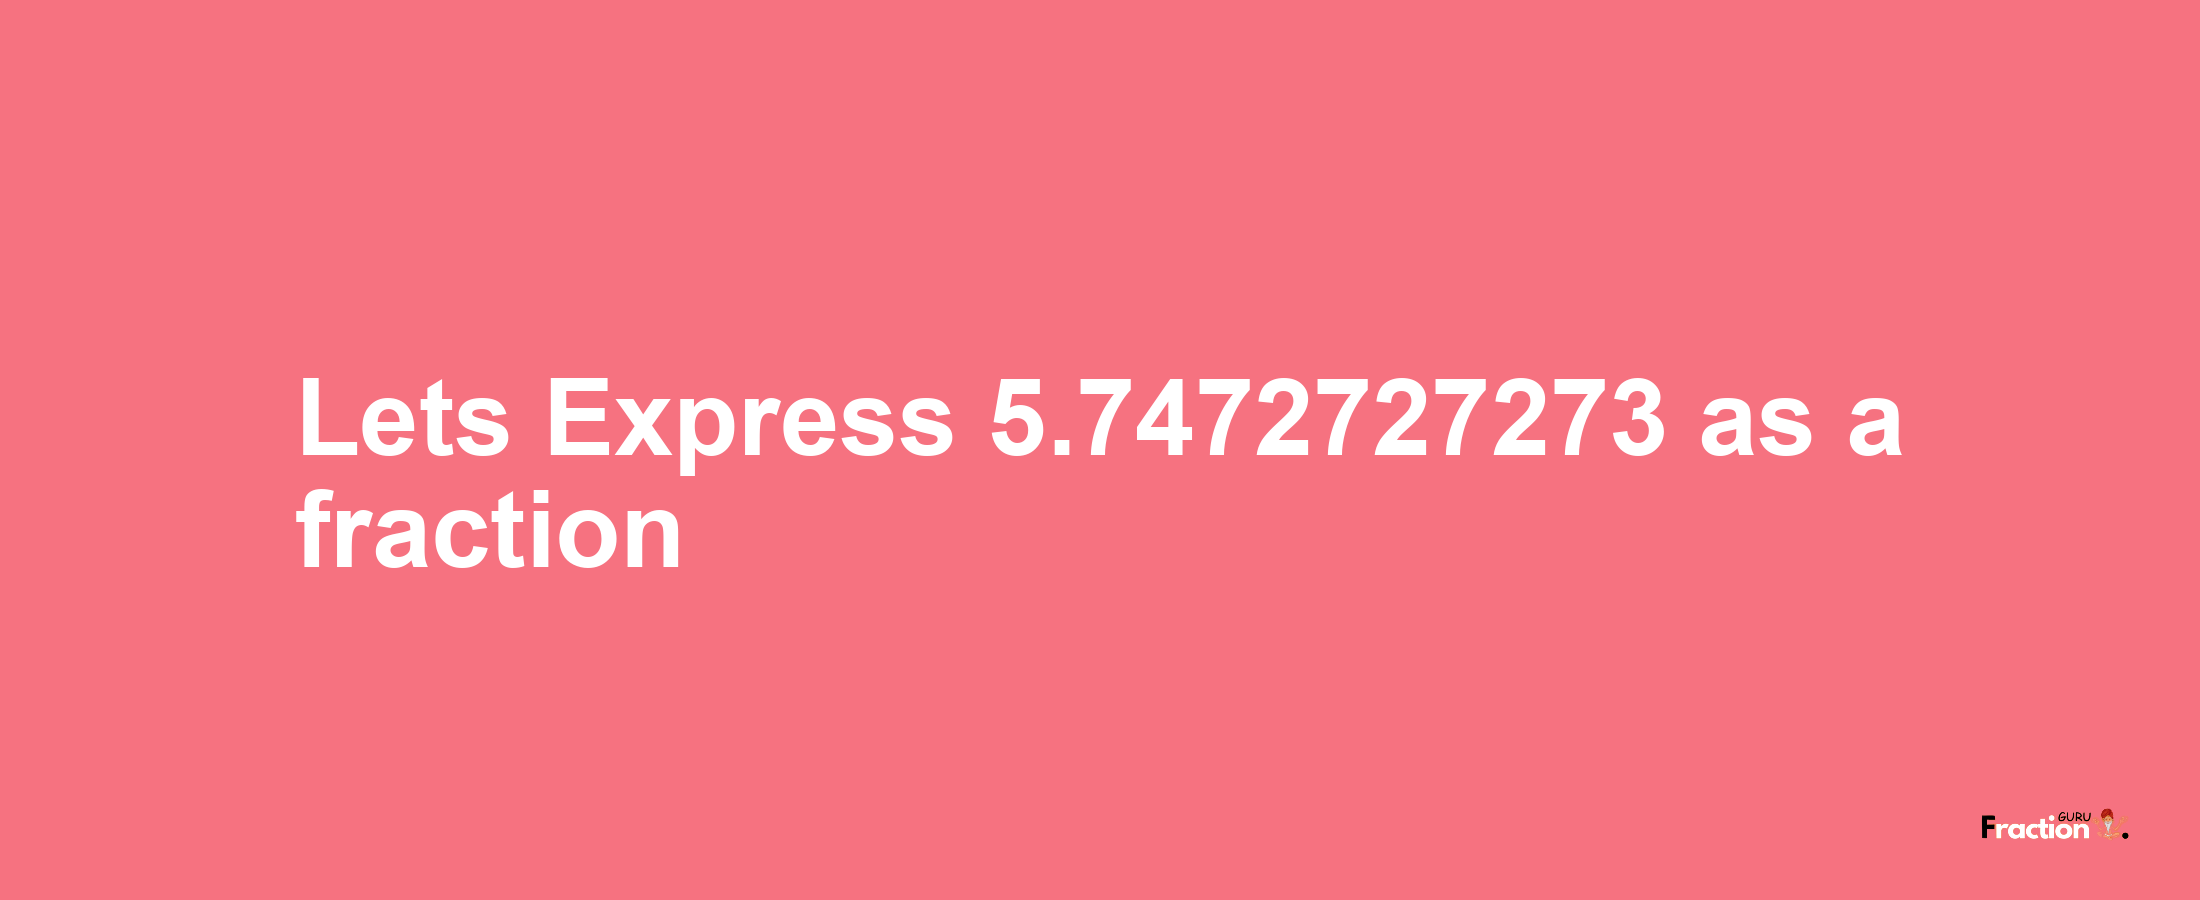 Lets Express 5.7472727273 as afraction